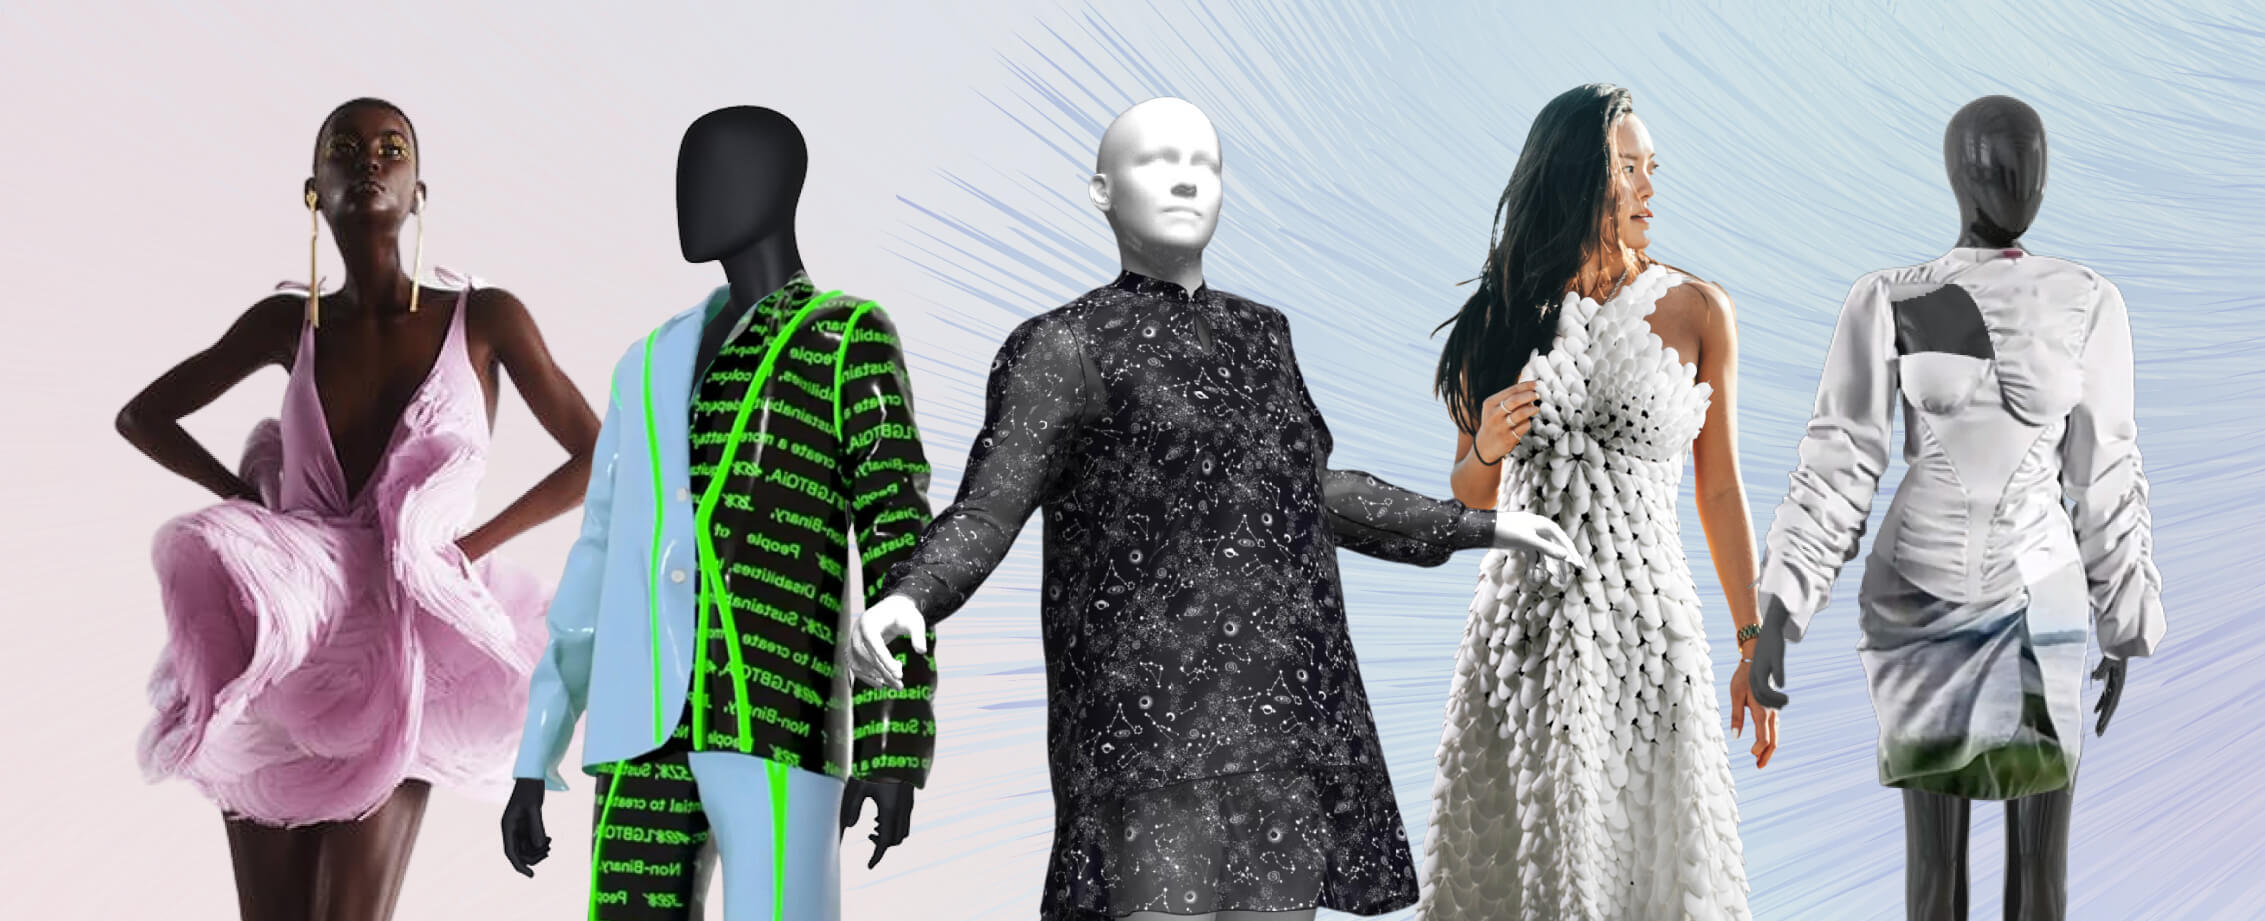 NFT in fashion: How are brands navigating the NFT space?